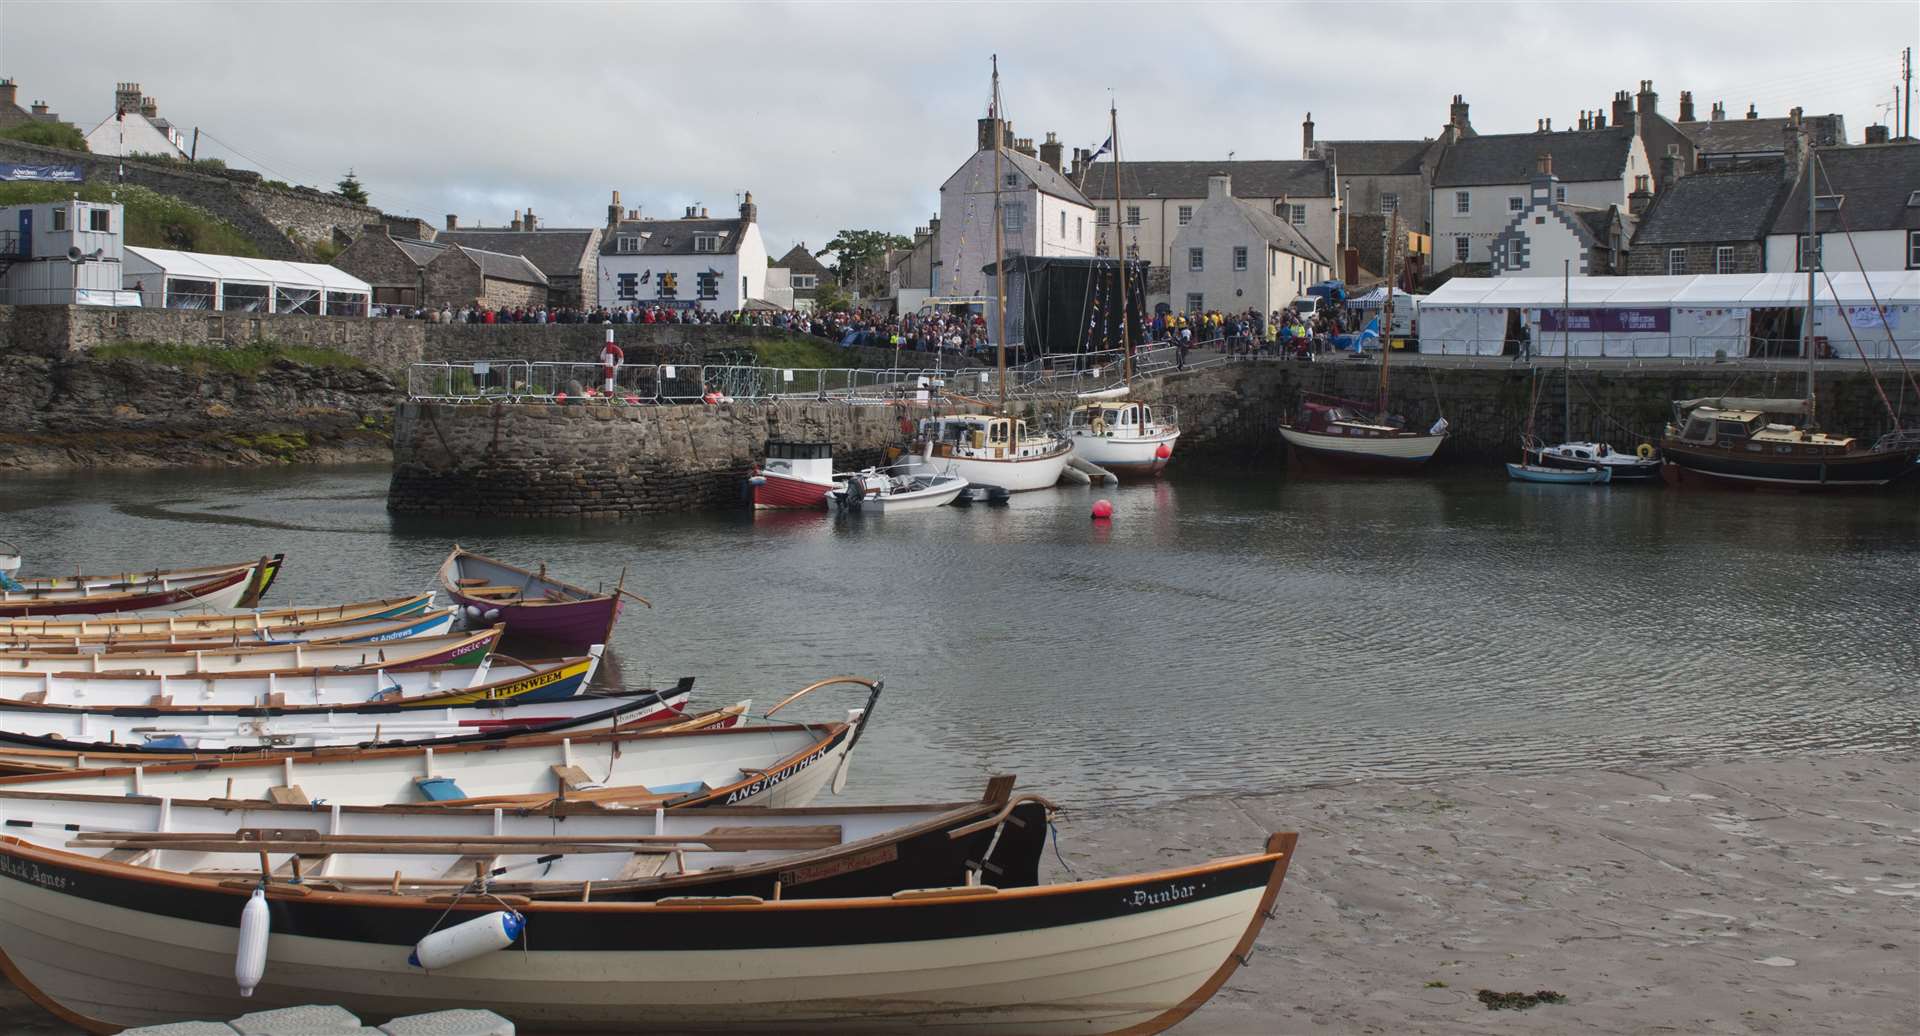 The Scottish Traditional Boat Festival was recognised with a national award.